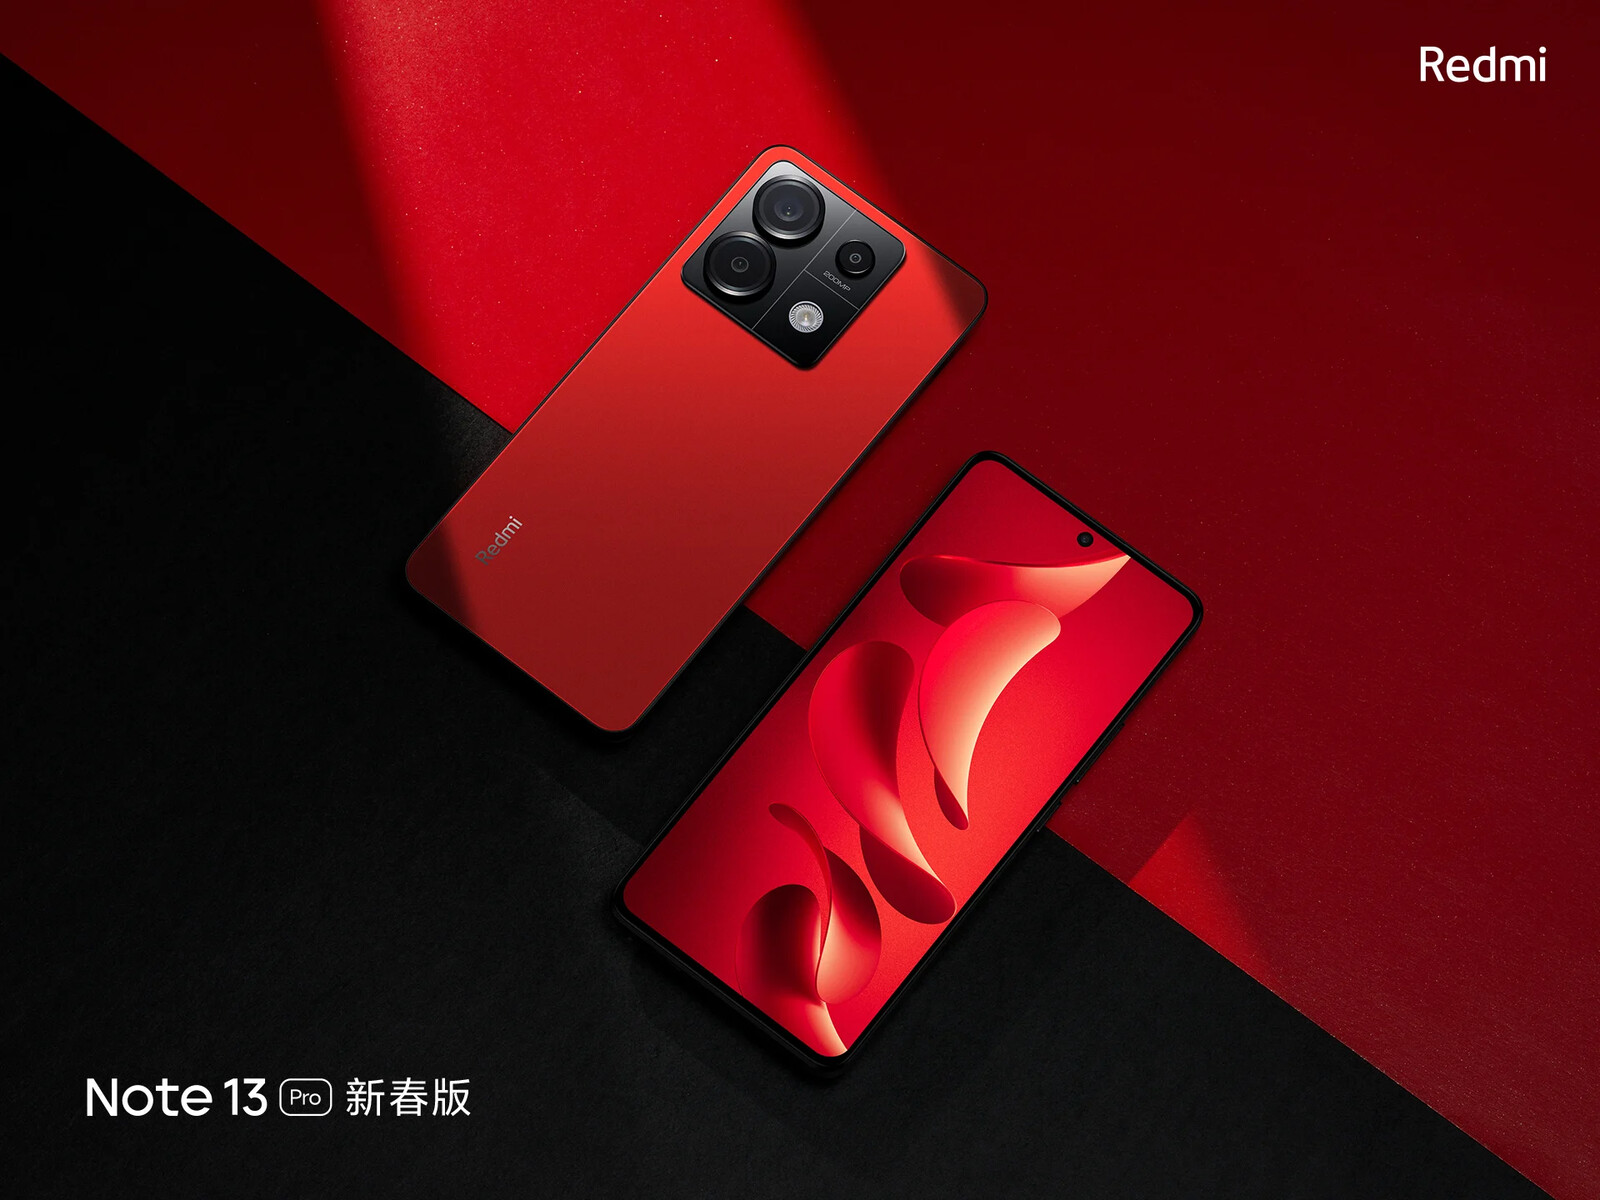 Xiaomi Redmi Note 13 (China) pictures, official photos